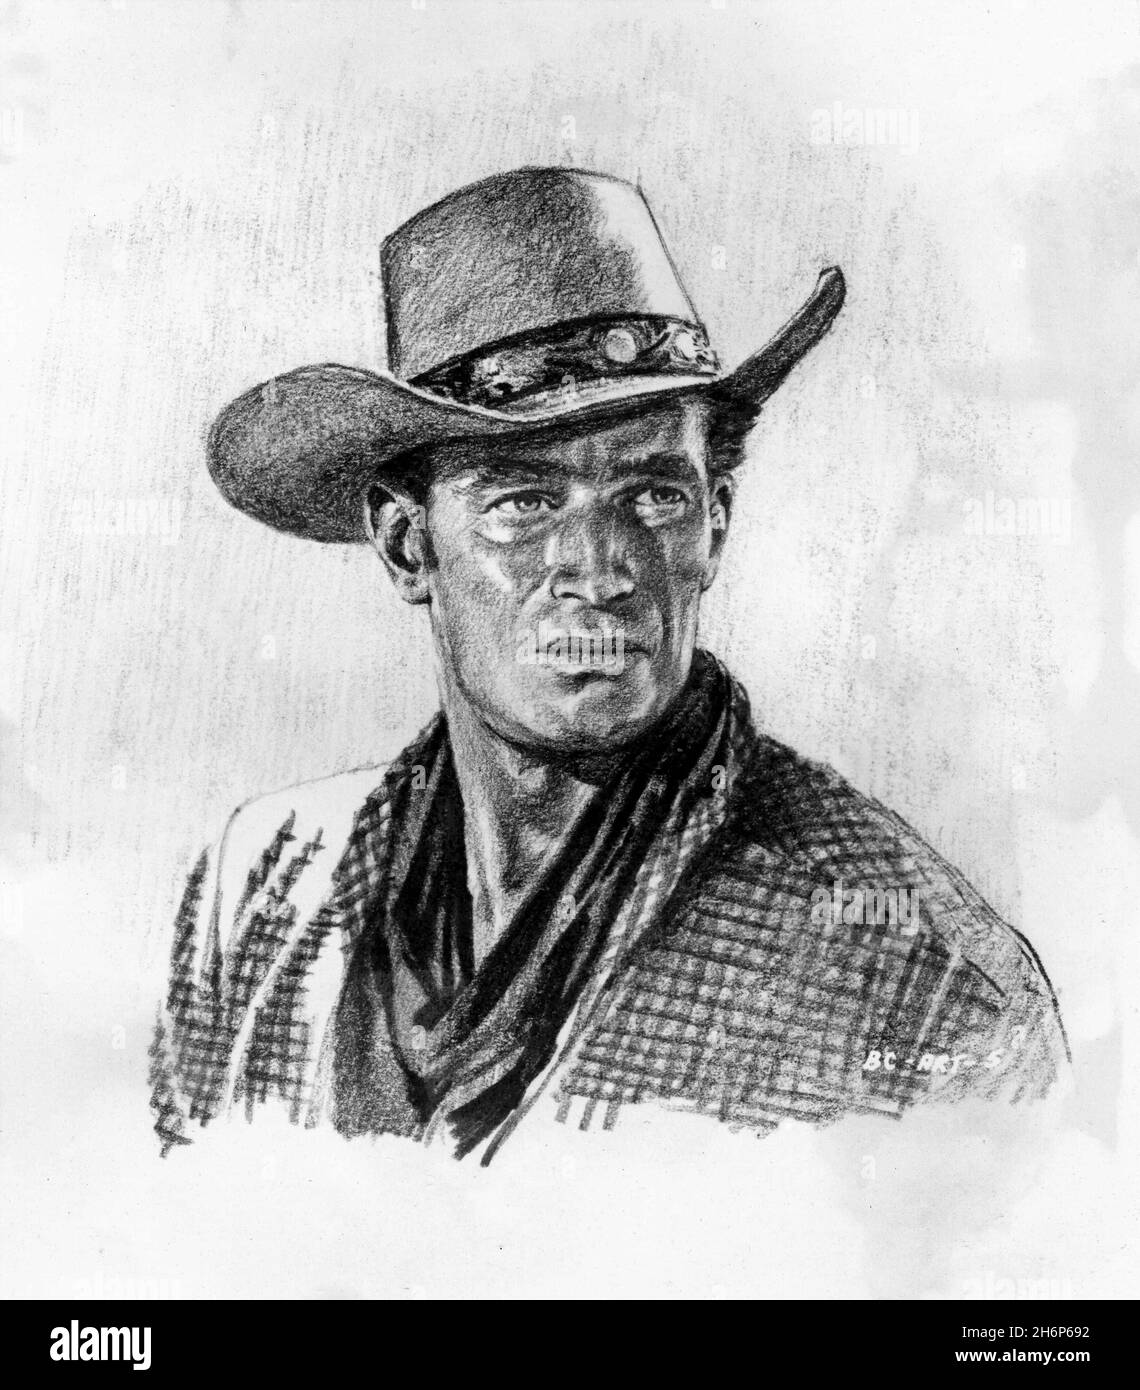 CHARLTON HESTON Promotional Artwork Portrait as Steve Leech in THE BIG COUNTRY 1958 director WILLIAM WYLER novel Donald Hamilton music Jerome Moross producers Gregory Peck and William Wyler Anthony - Worldwide Productions / United Artists Stock Photo